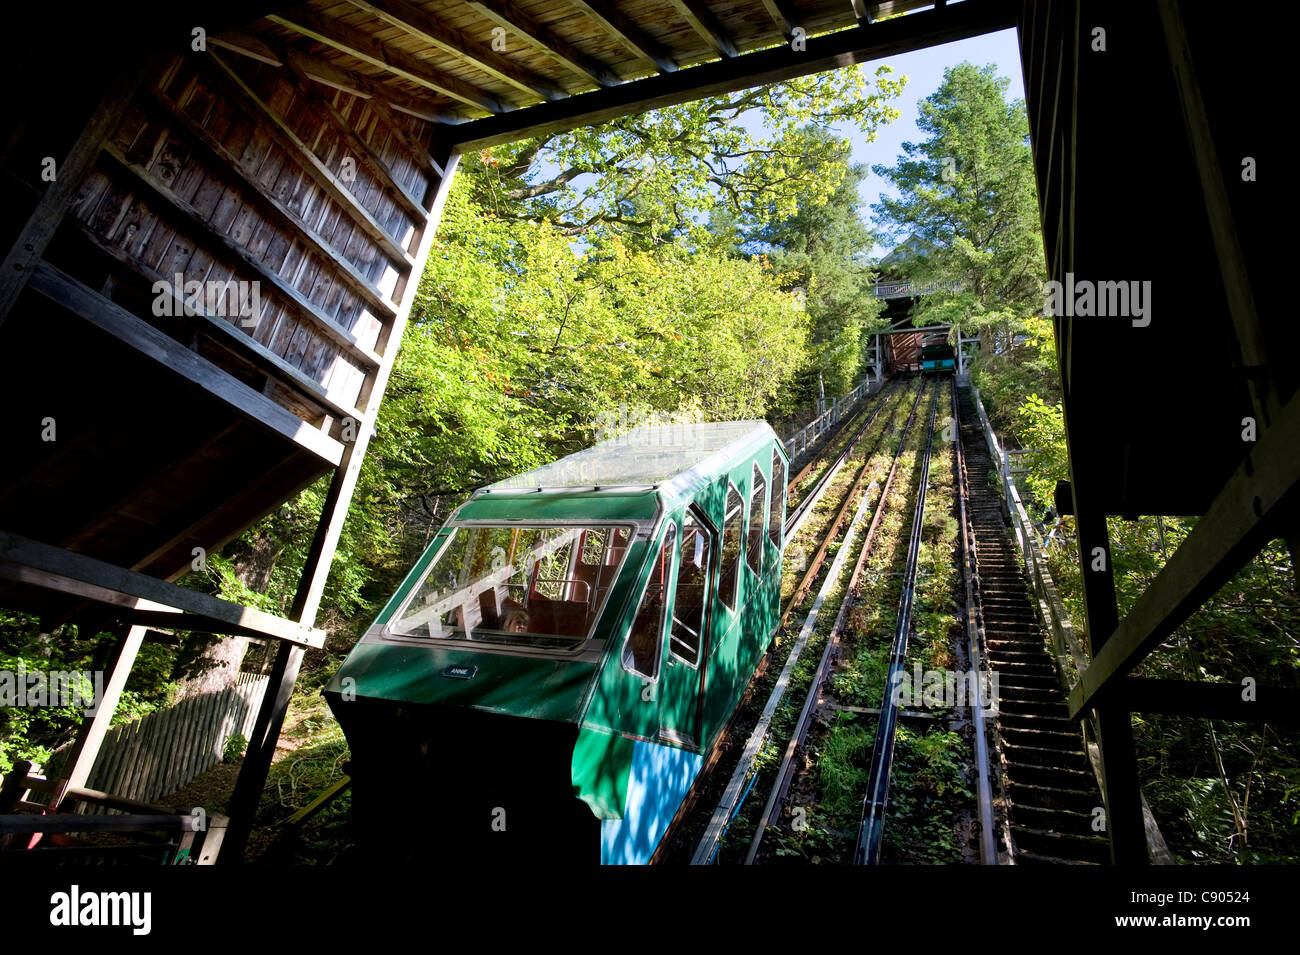 A car on the water- balanced Funicular cliff railway, one of the steepest cliff railways in the world, with a gradient of 35 degrees at The Centre for Alternative Technology, or CAT, in Machynlleth, Powys, North Wales, UK. Stock Photo